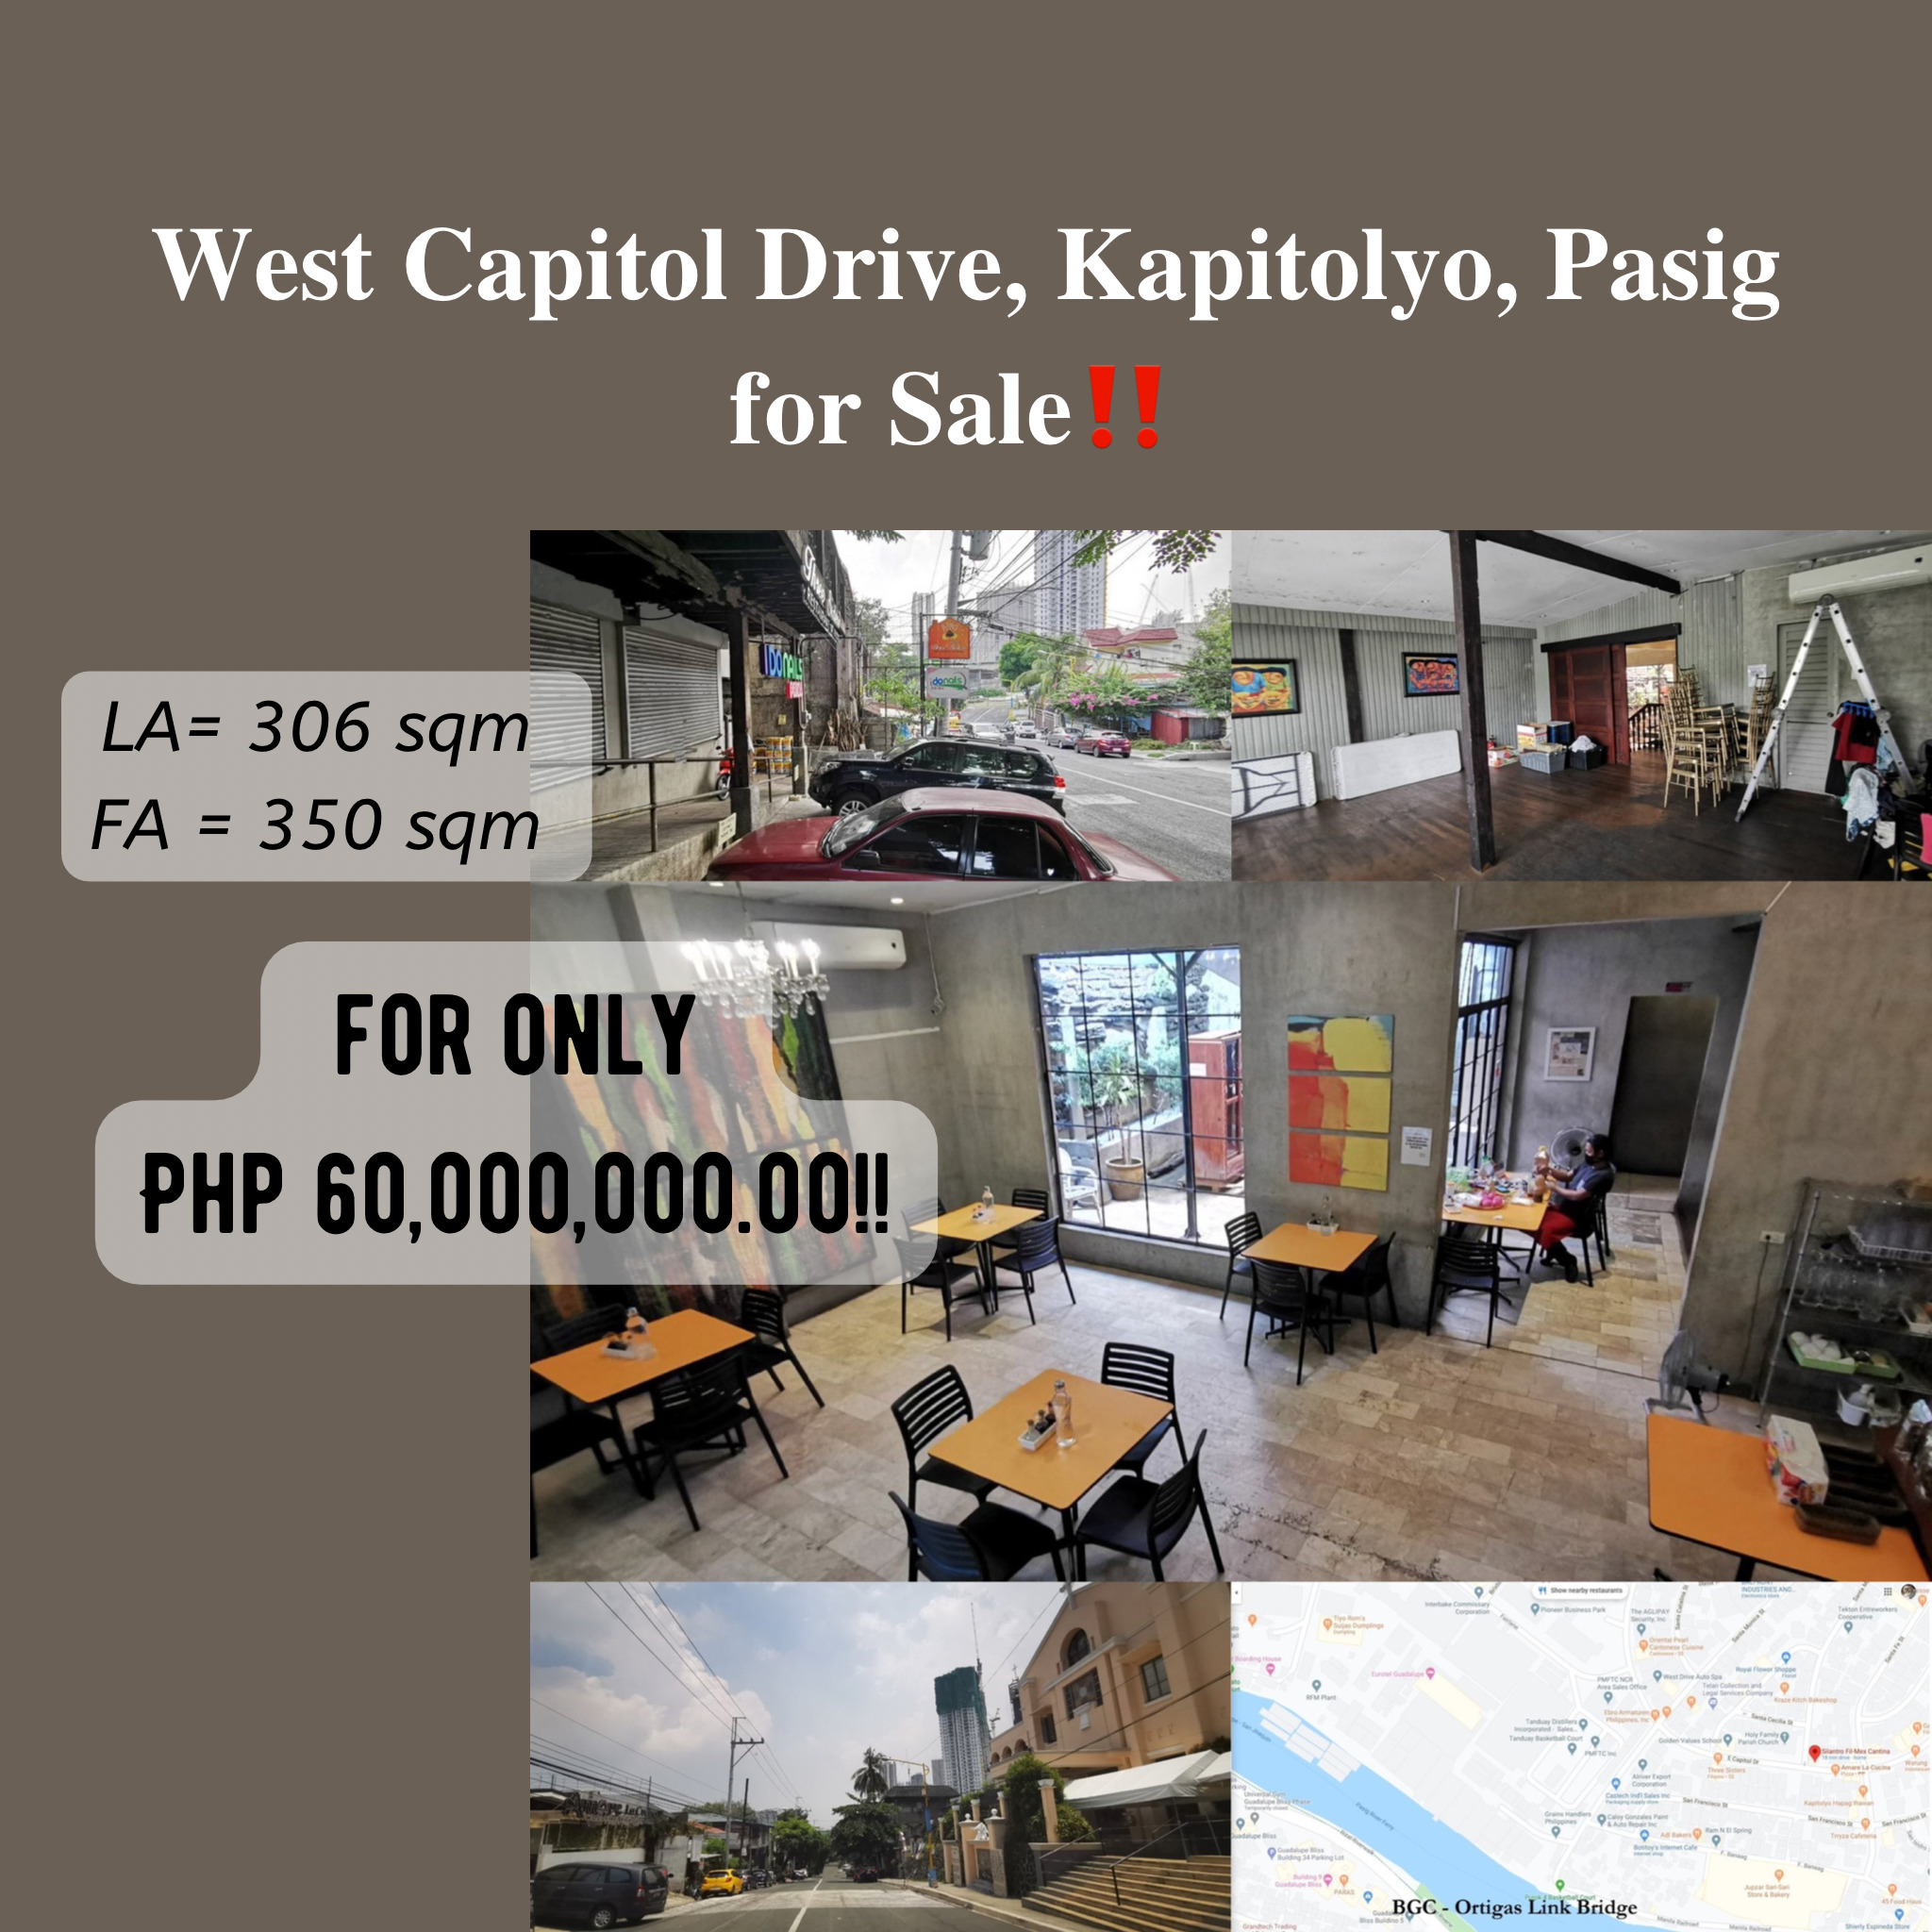 West Capitol Drive, Kapitolyo, Pasig for Sale, Best Offer